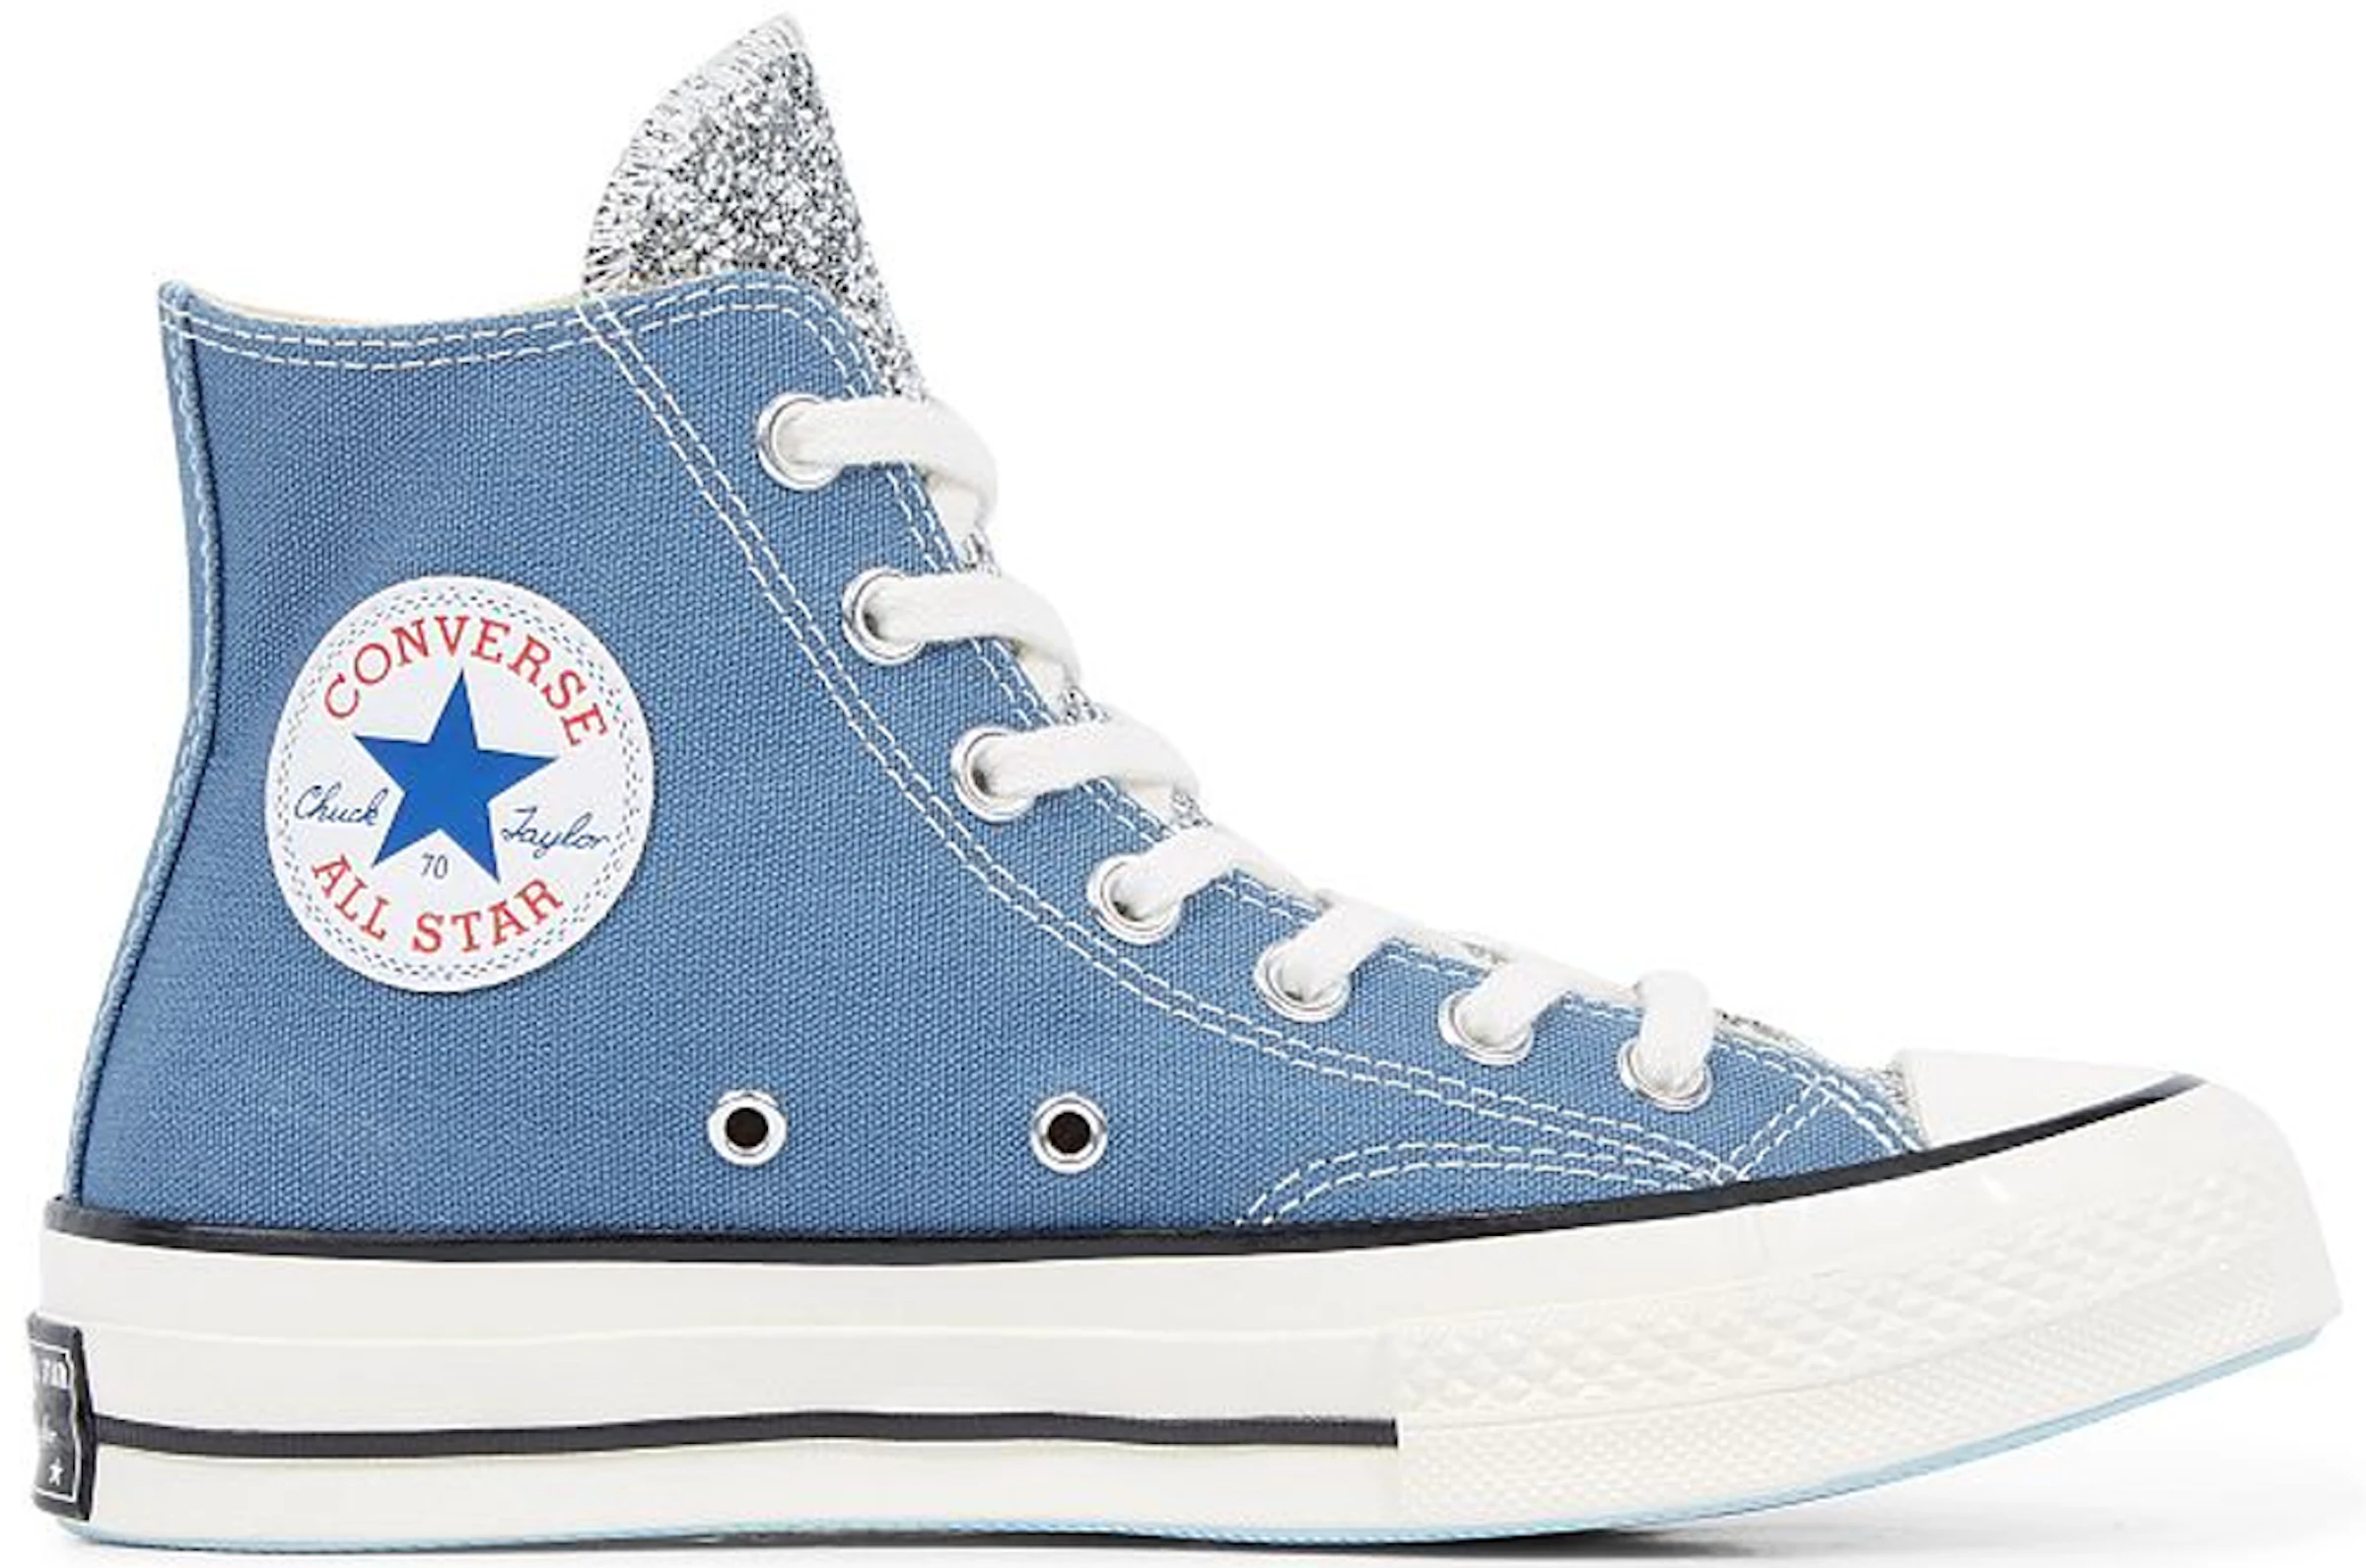 Converse All Star Personalizzate Jeans Denim Deluxe | vlr.eng.br